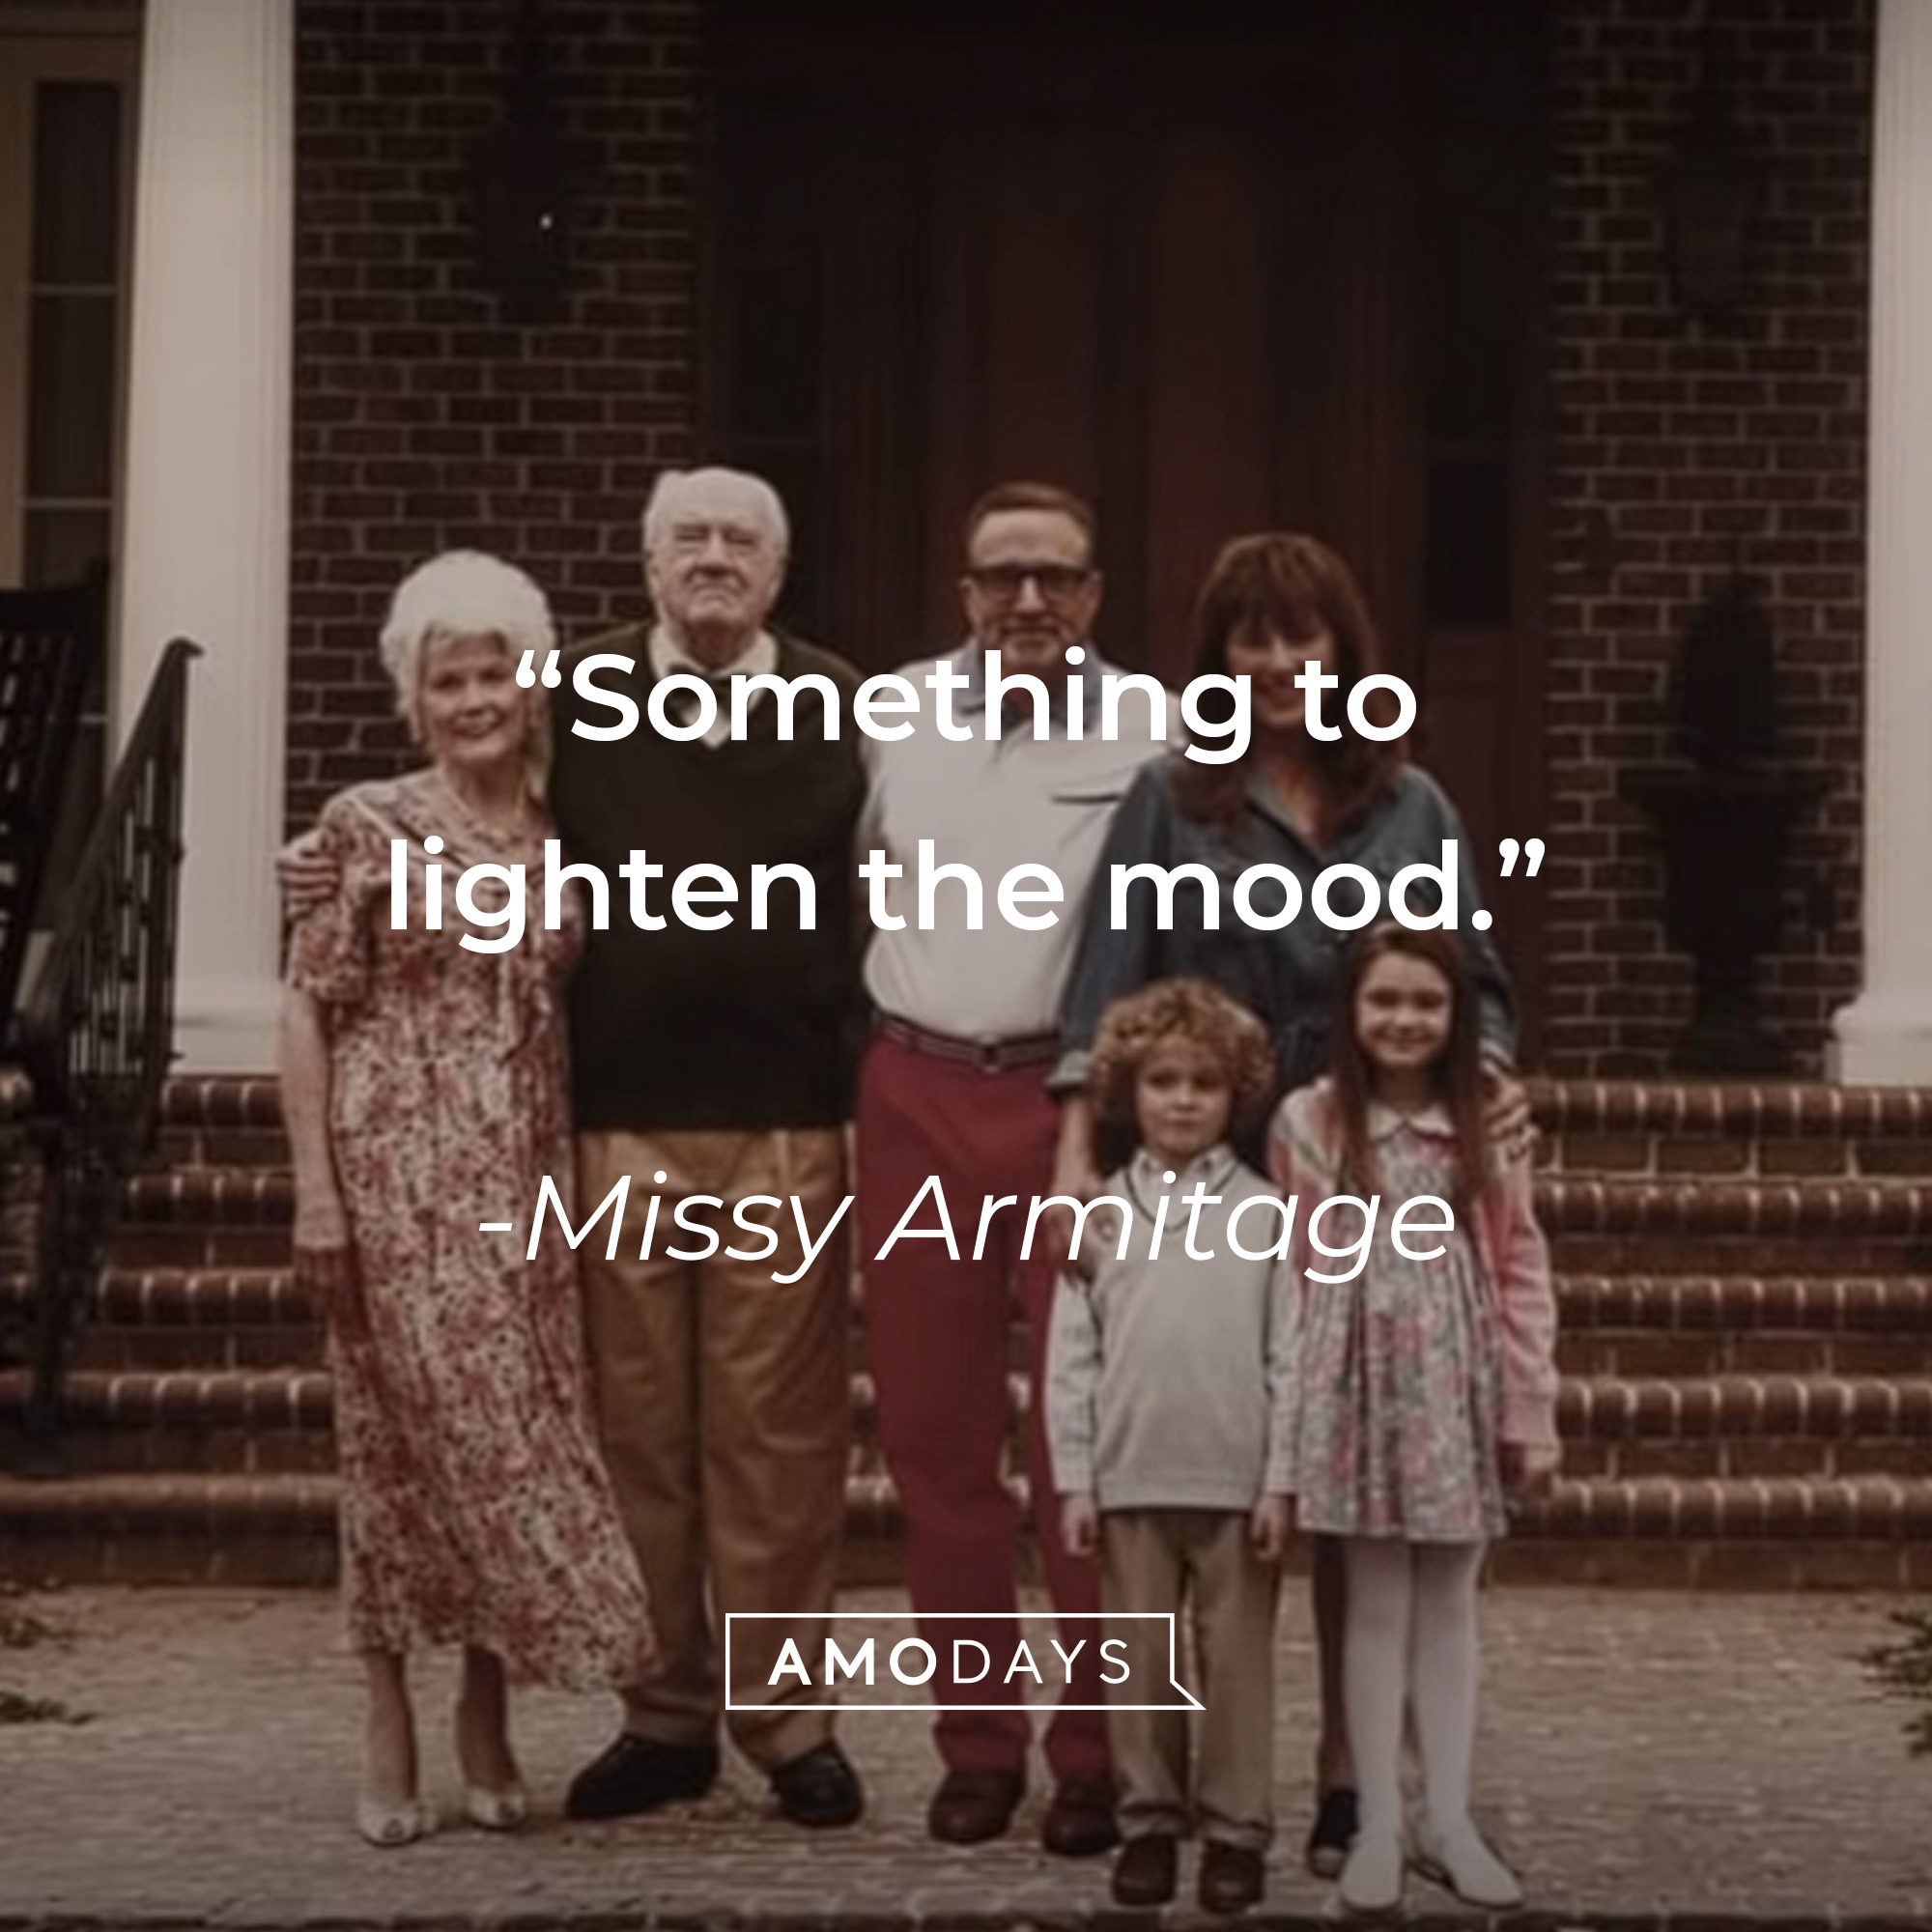 An image of a family with Missy Armitage’s quote: “Something to lighten the mood.” | Source: youtube.com/UniversalpicturesIta